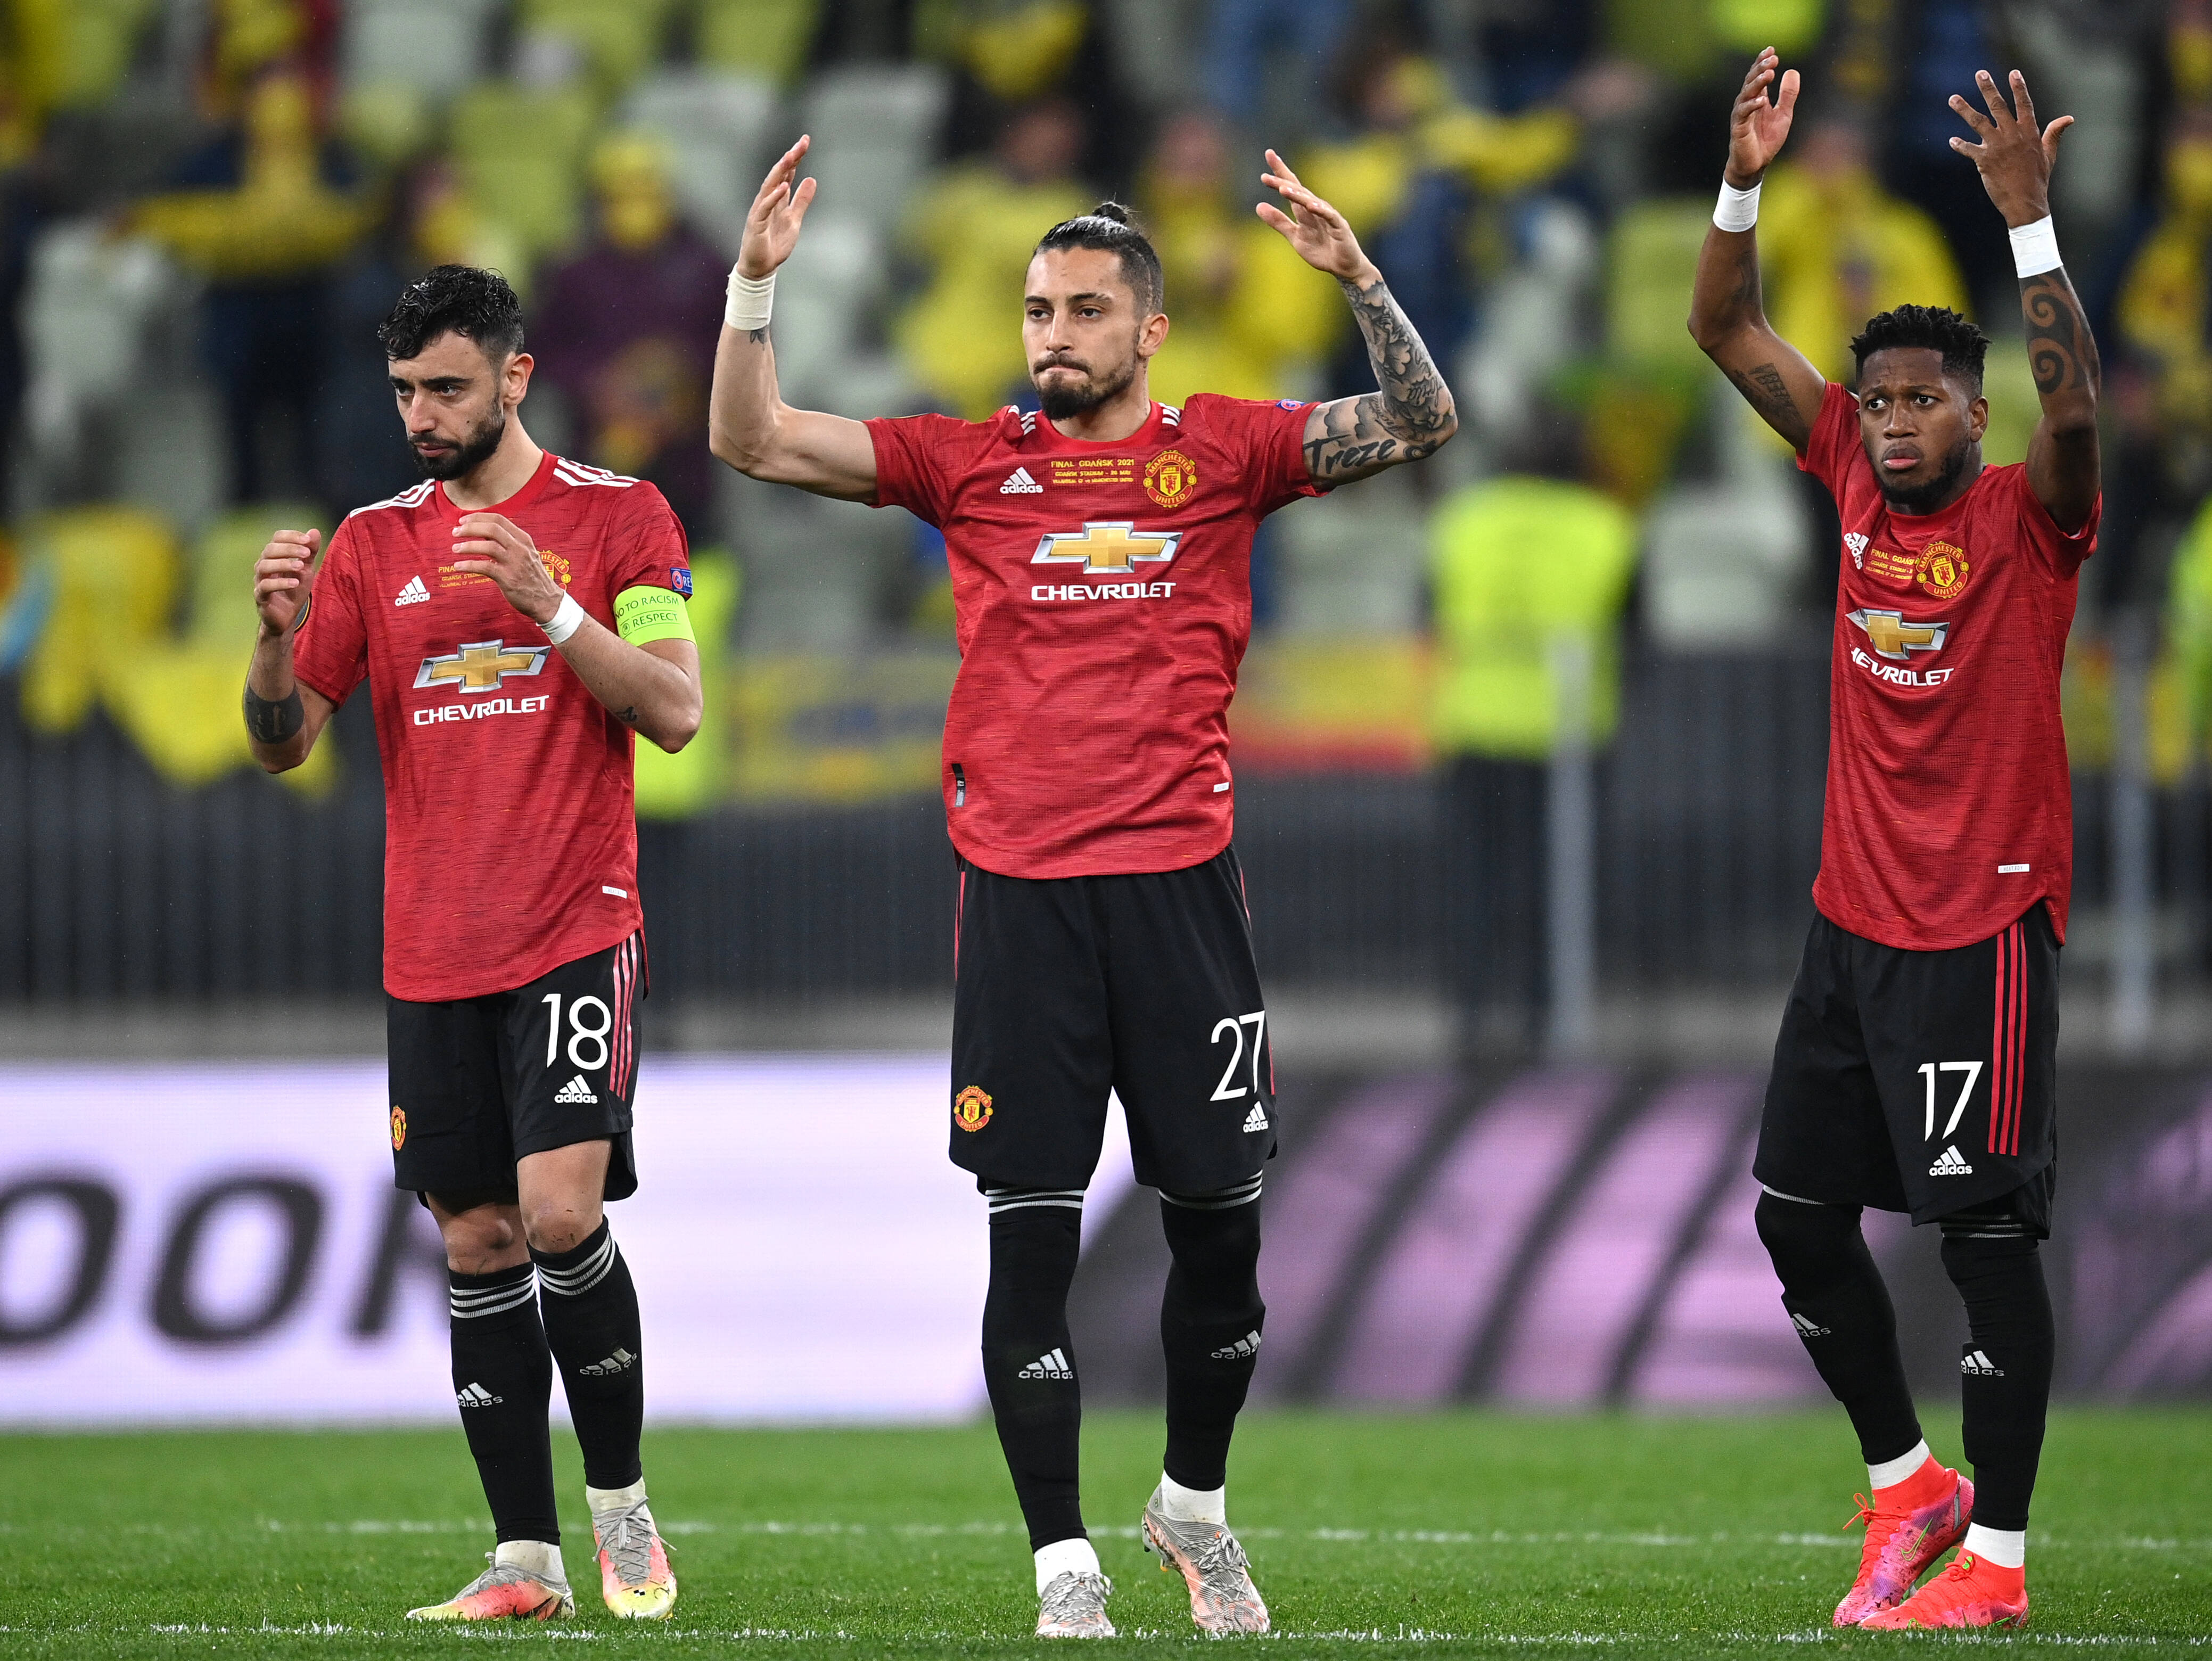 Manchester United trio Bruno Fernandes, Alex Telles and Fred (left to right) pictured during the 2021 Europa League final